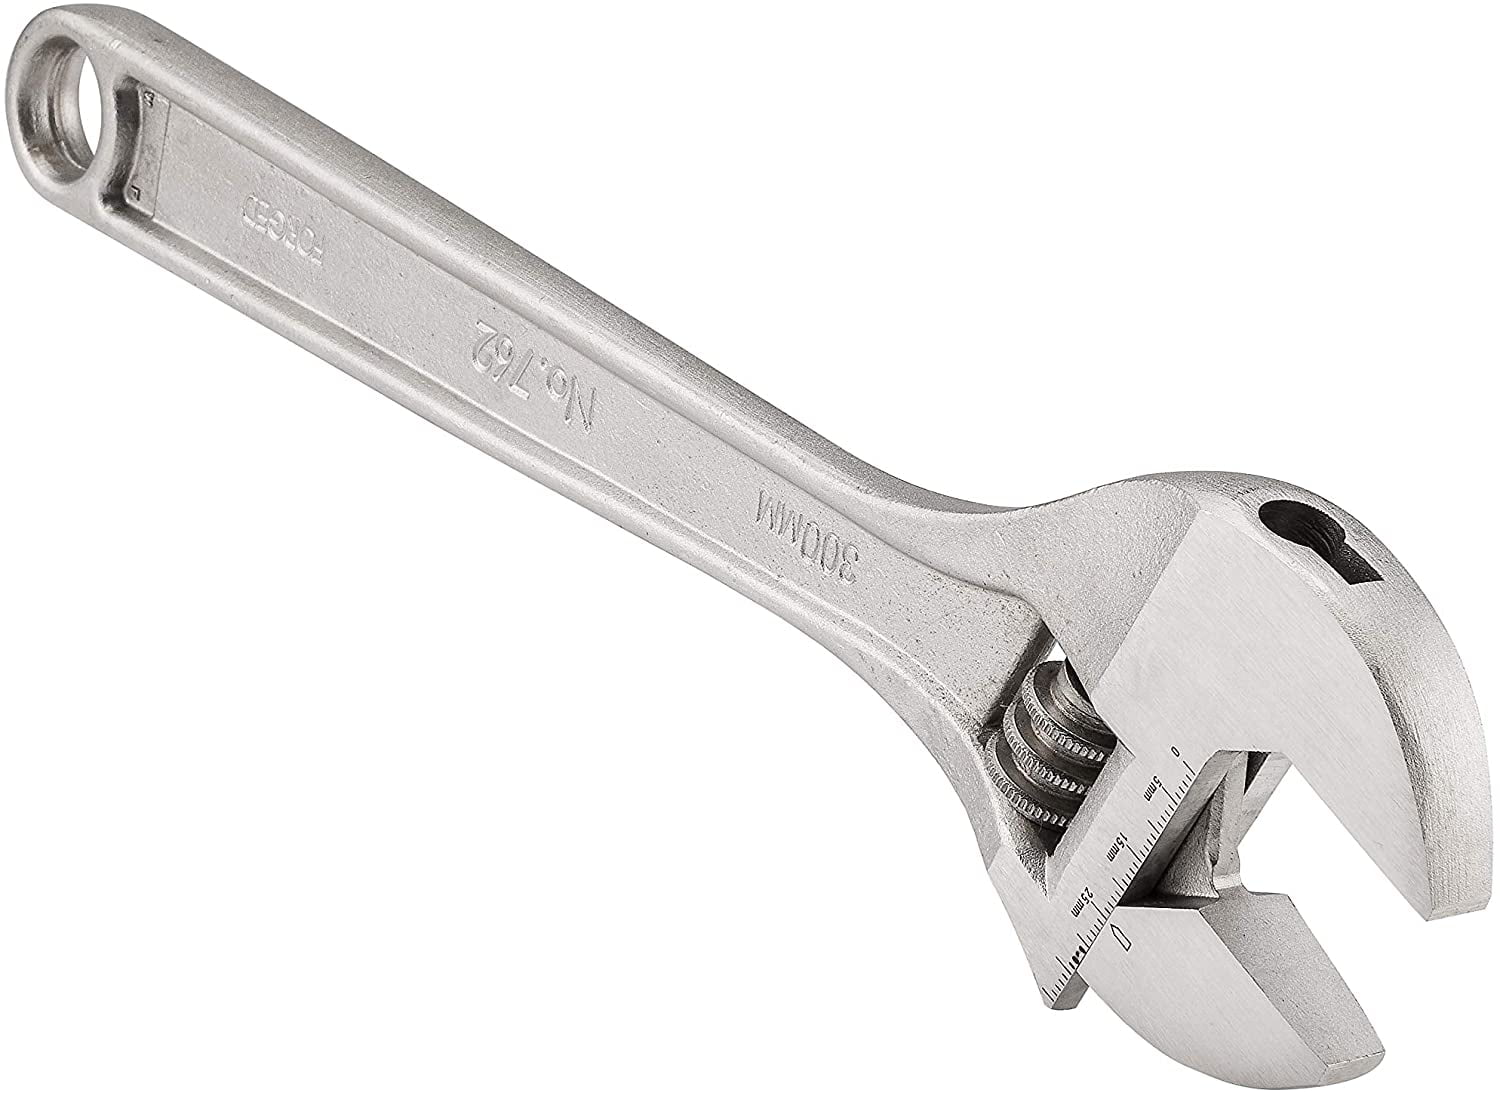 RIDGID 86917 Model 762 Adjustable Wrench 12 inch Metric and SAE